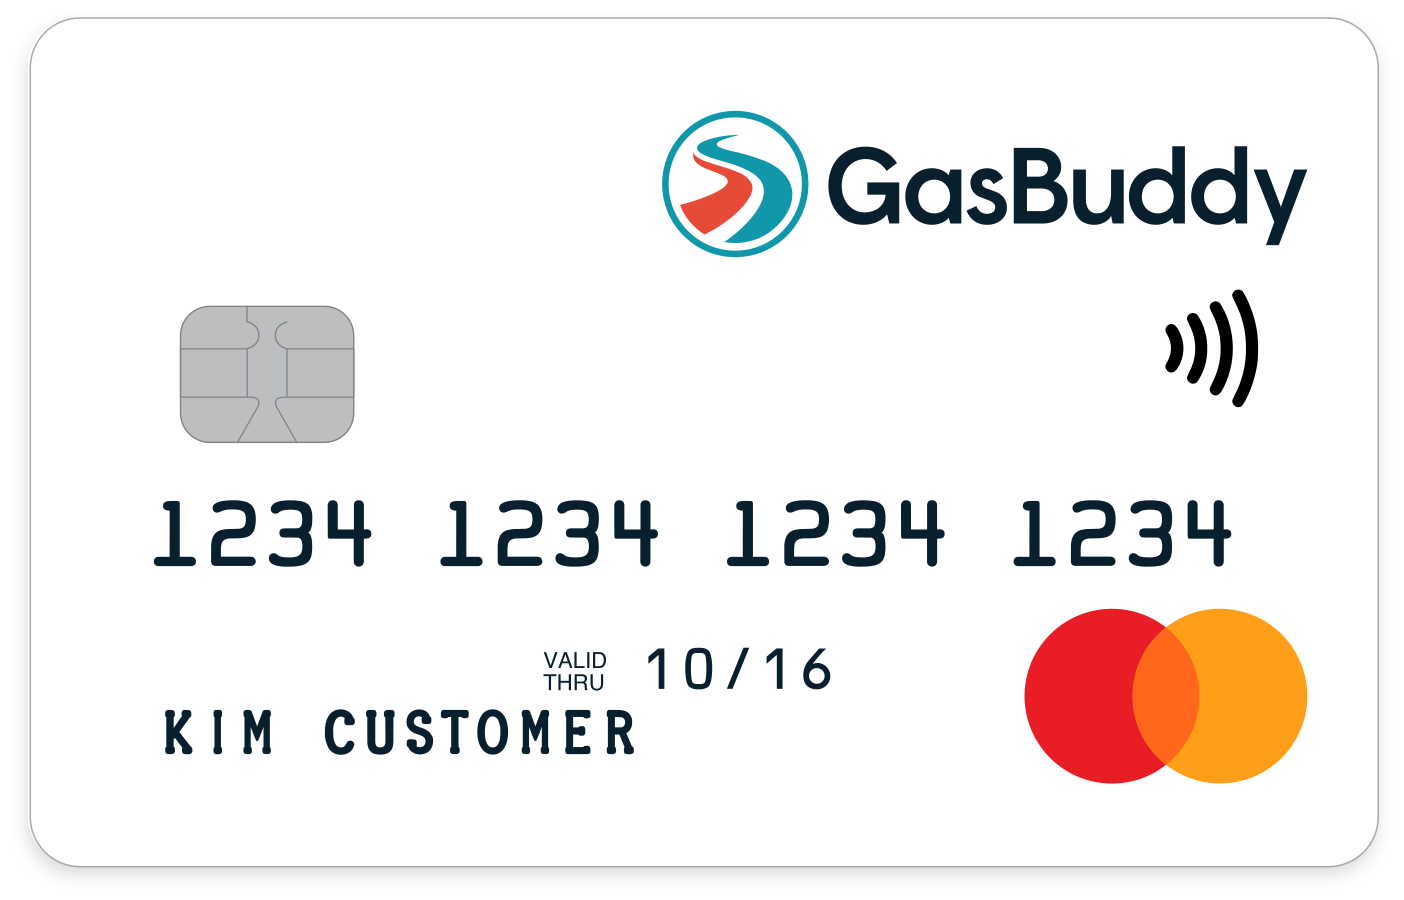 Get the GasBuddy Credit Card - Apply Today to Earn Rewards